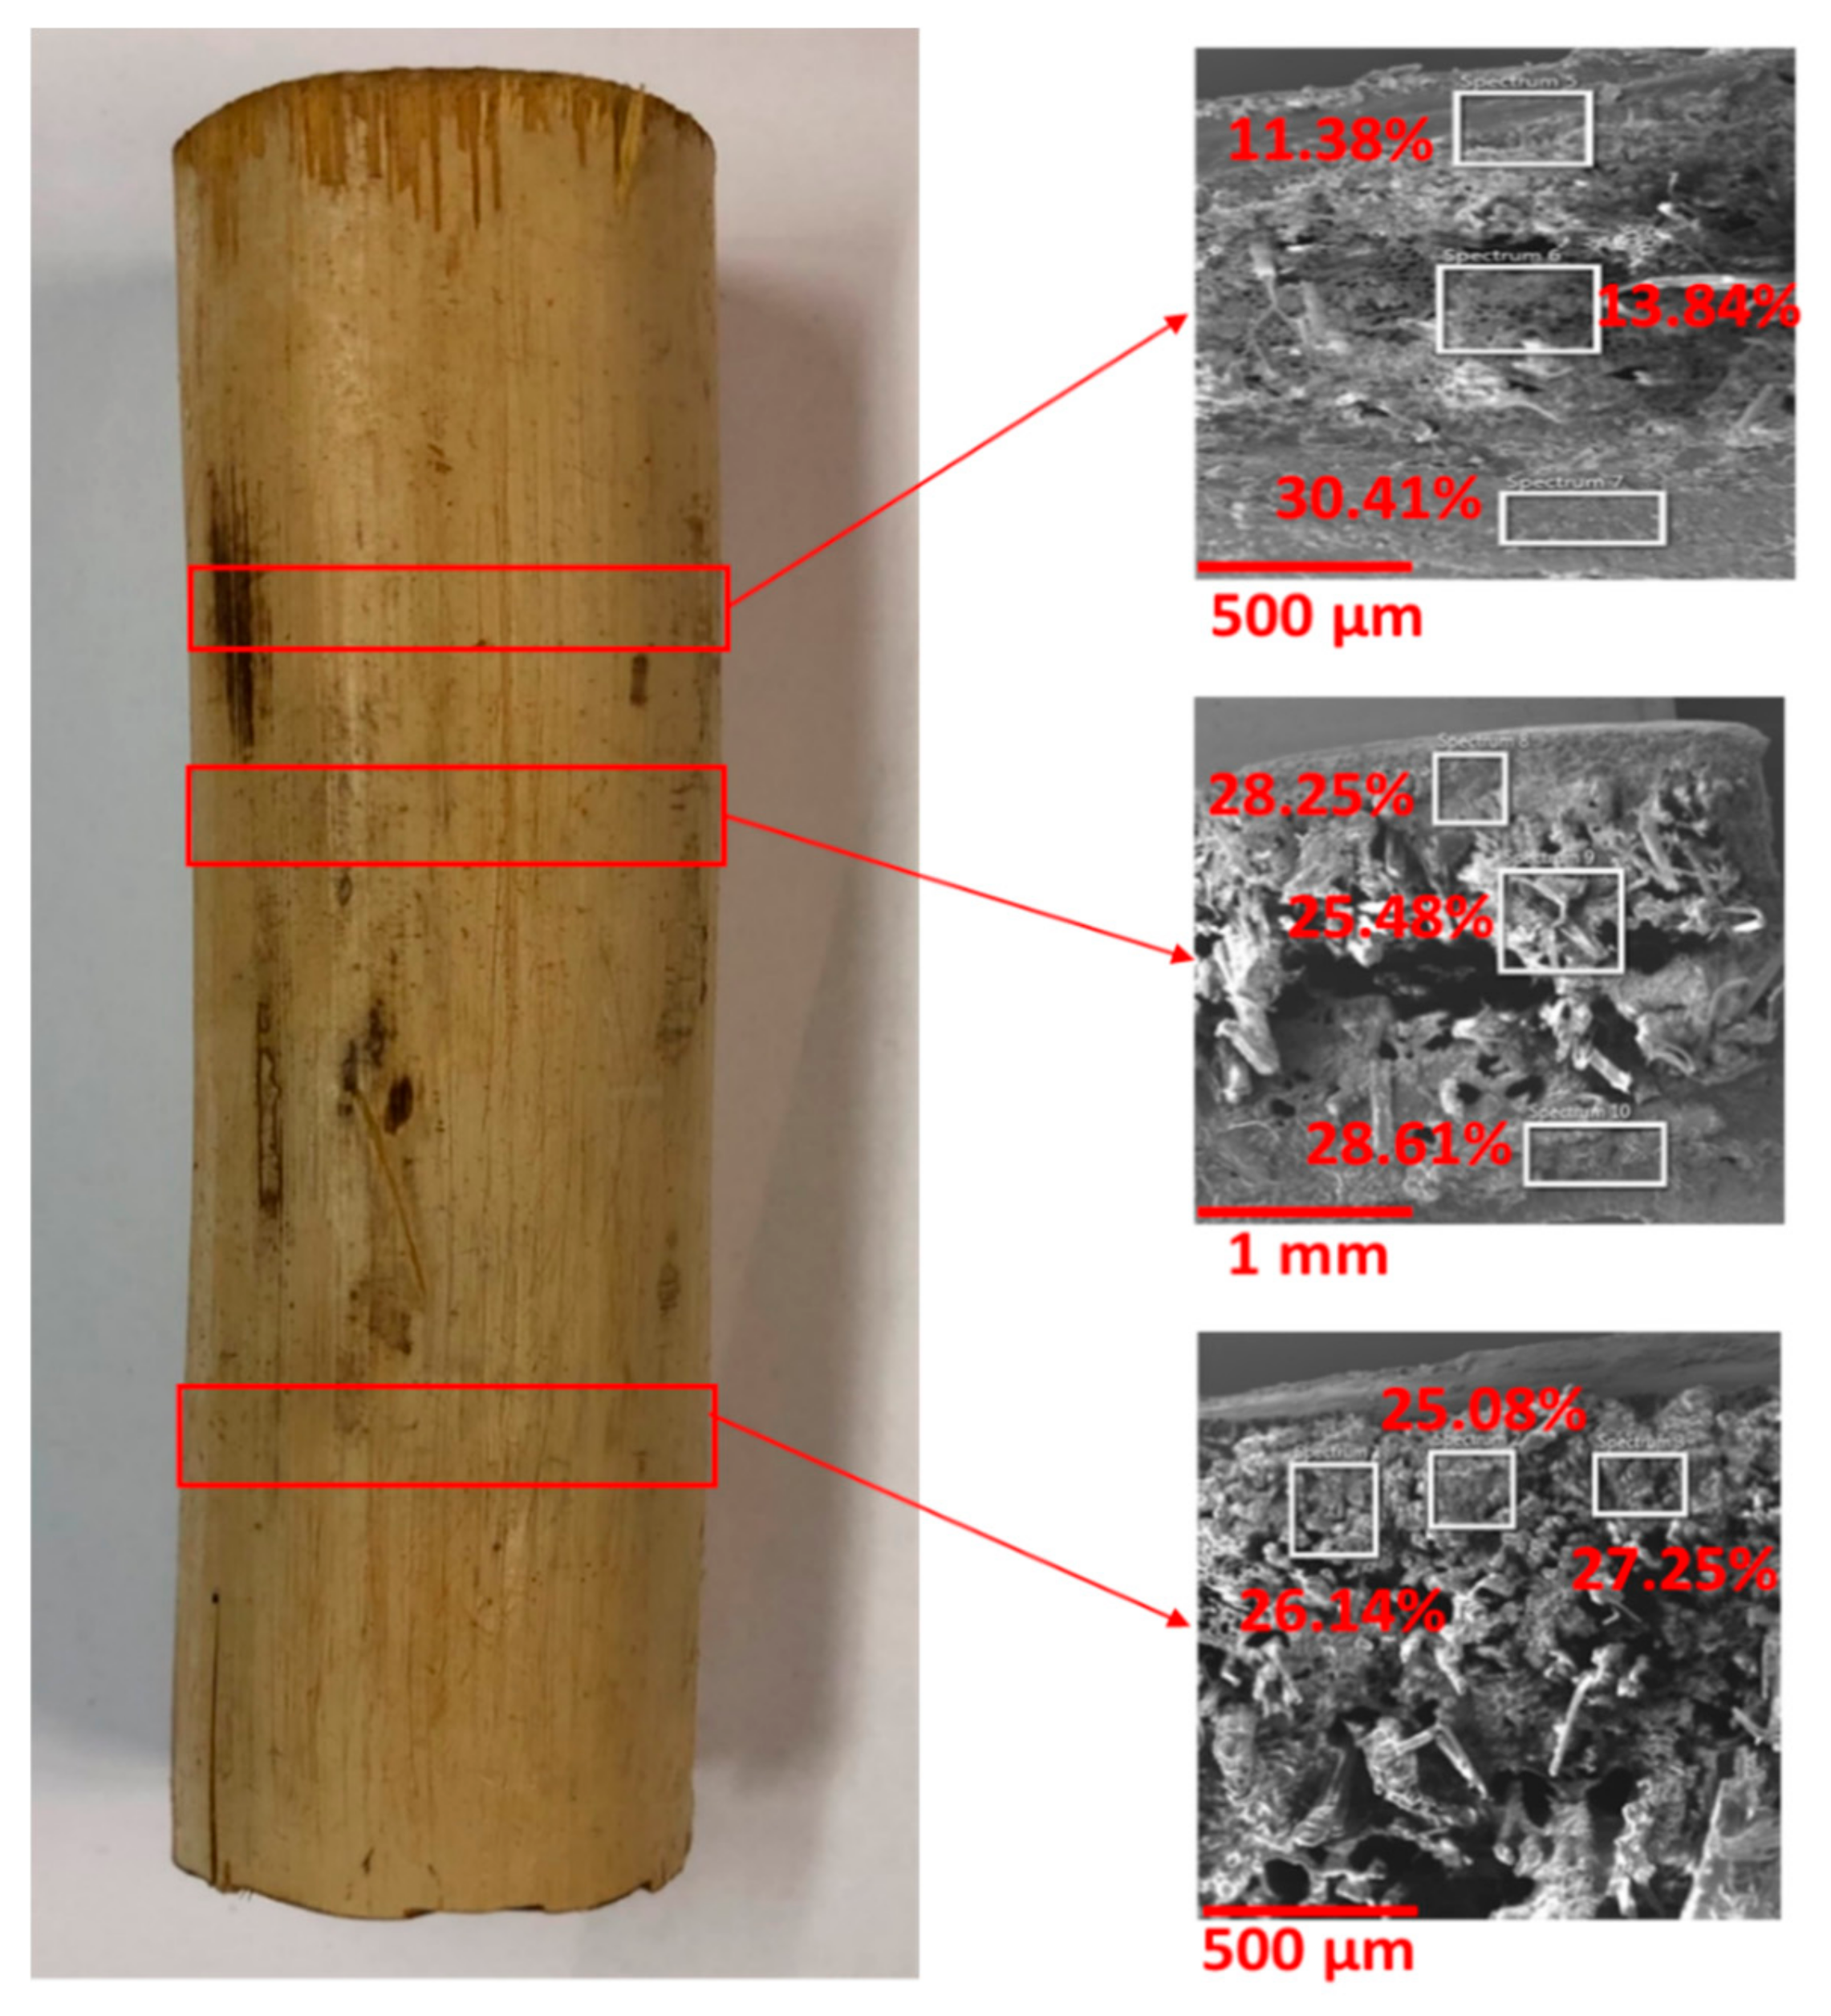 An improved plastination method for strengthening bamboo culms, without  compromising biodegradability